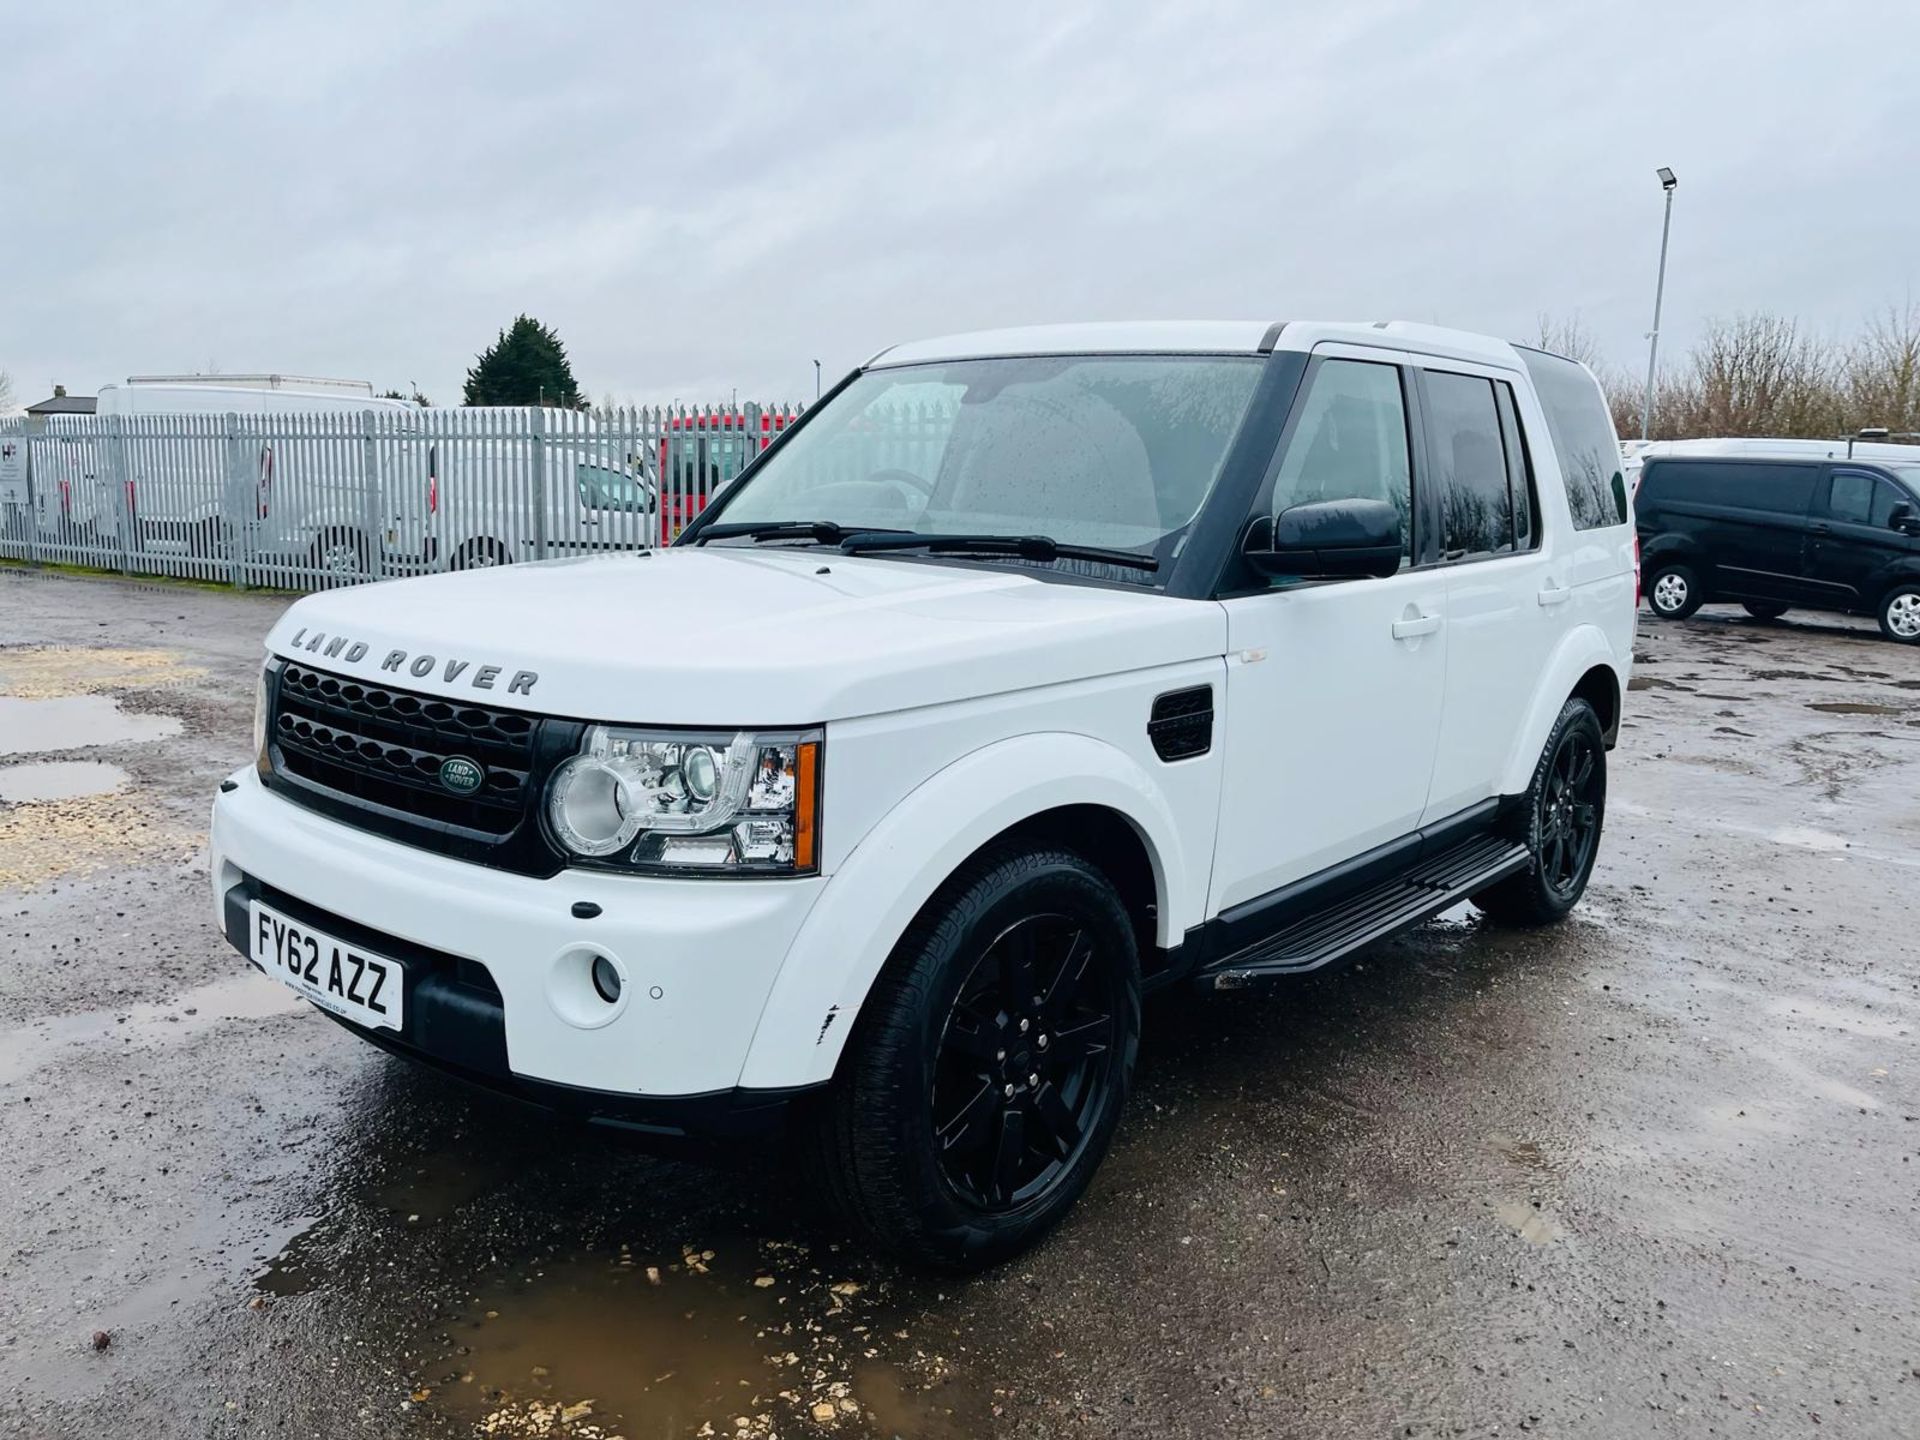 ** ON SALE ** Land Rover Discovery 4 255 SDV6 3.0 2012 '62 Reg' - Alloy Wheels - A/C - Tow Bar - Image 3 of 32